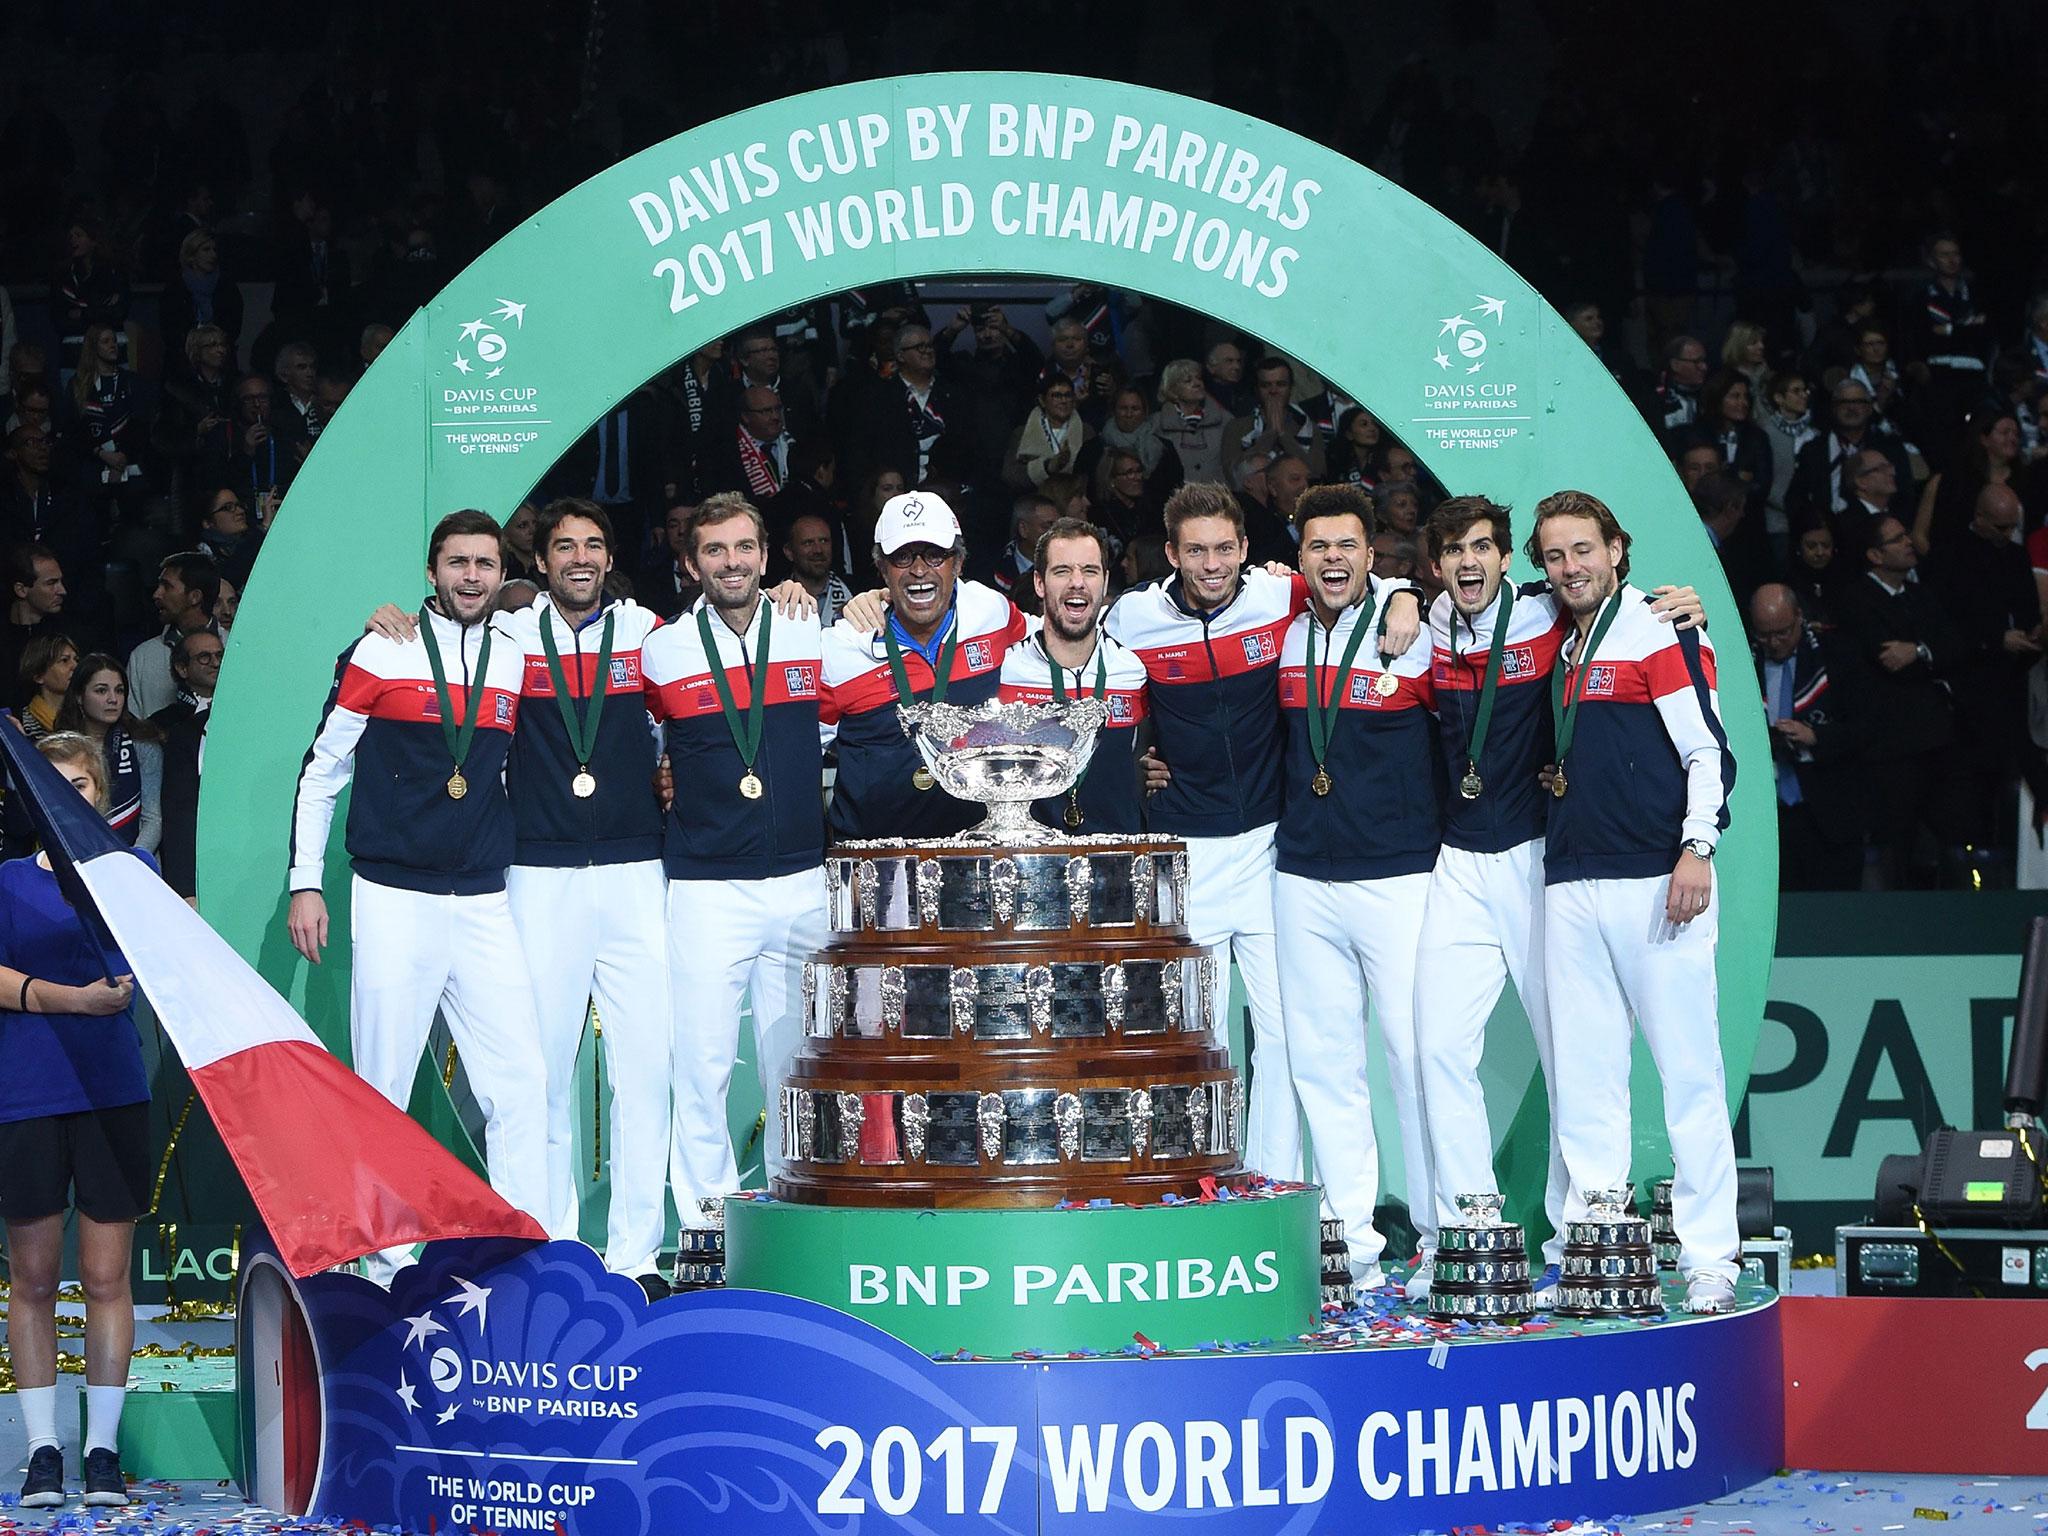 France are the current holders of the Davis Cup